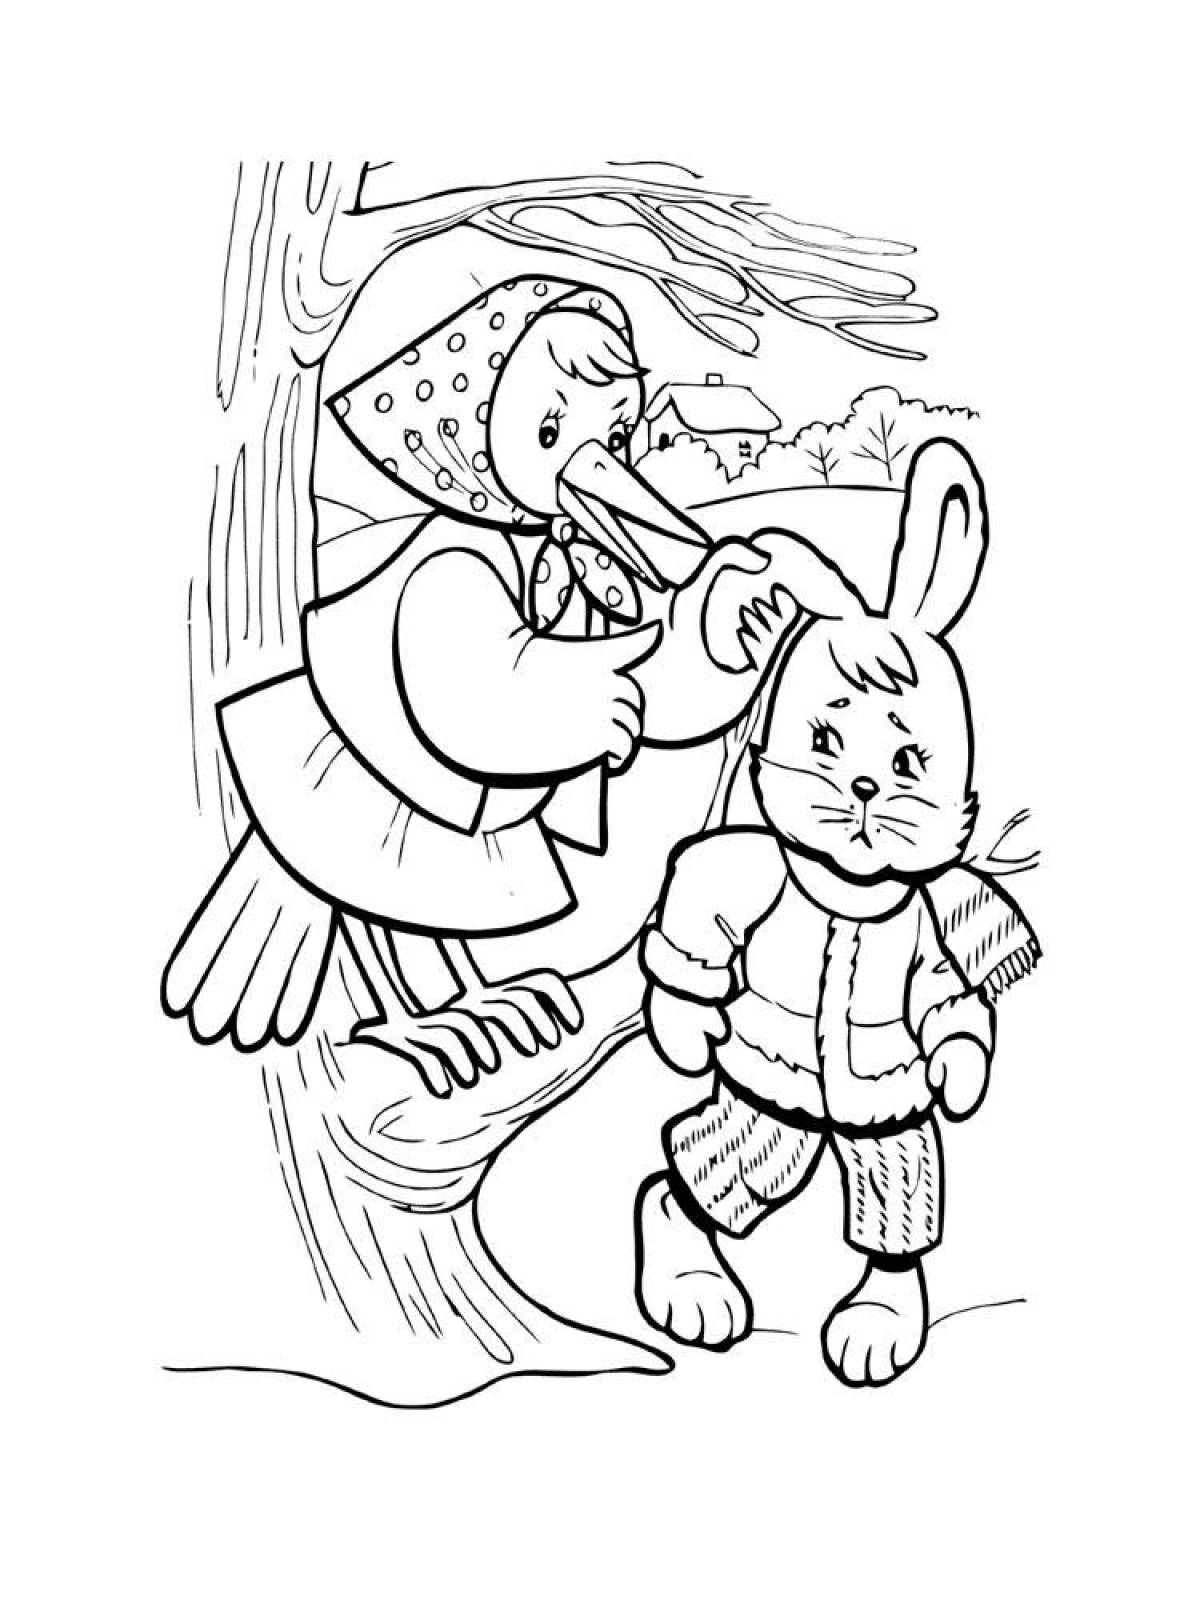 Coloring pages of fairy tales